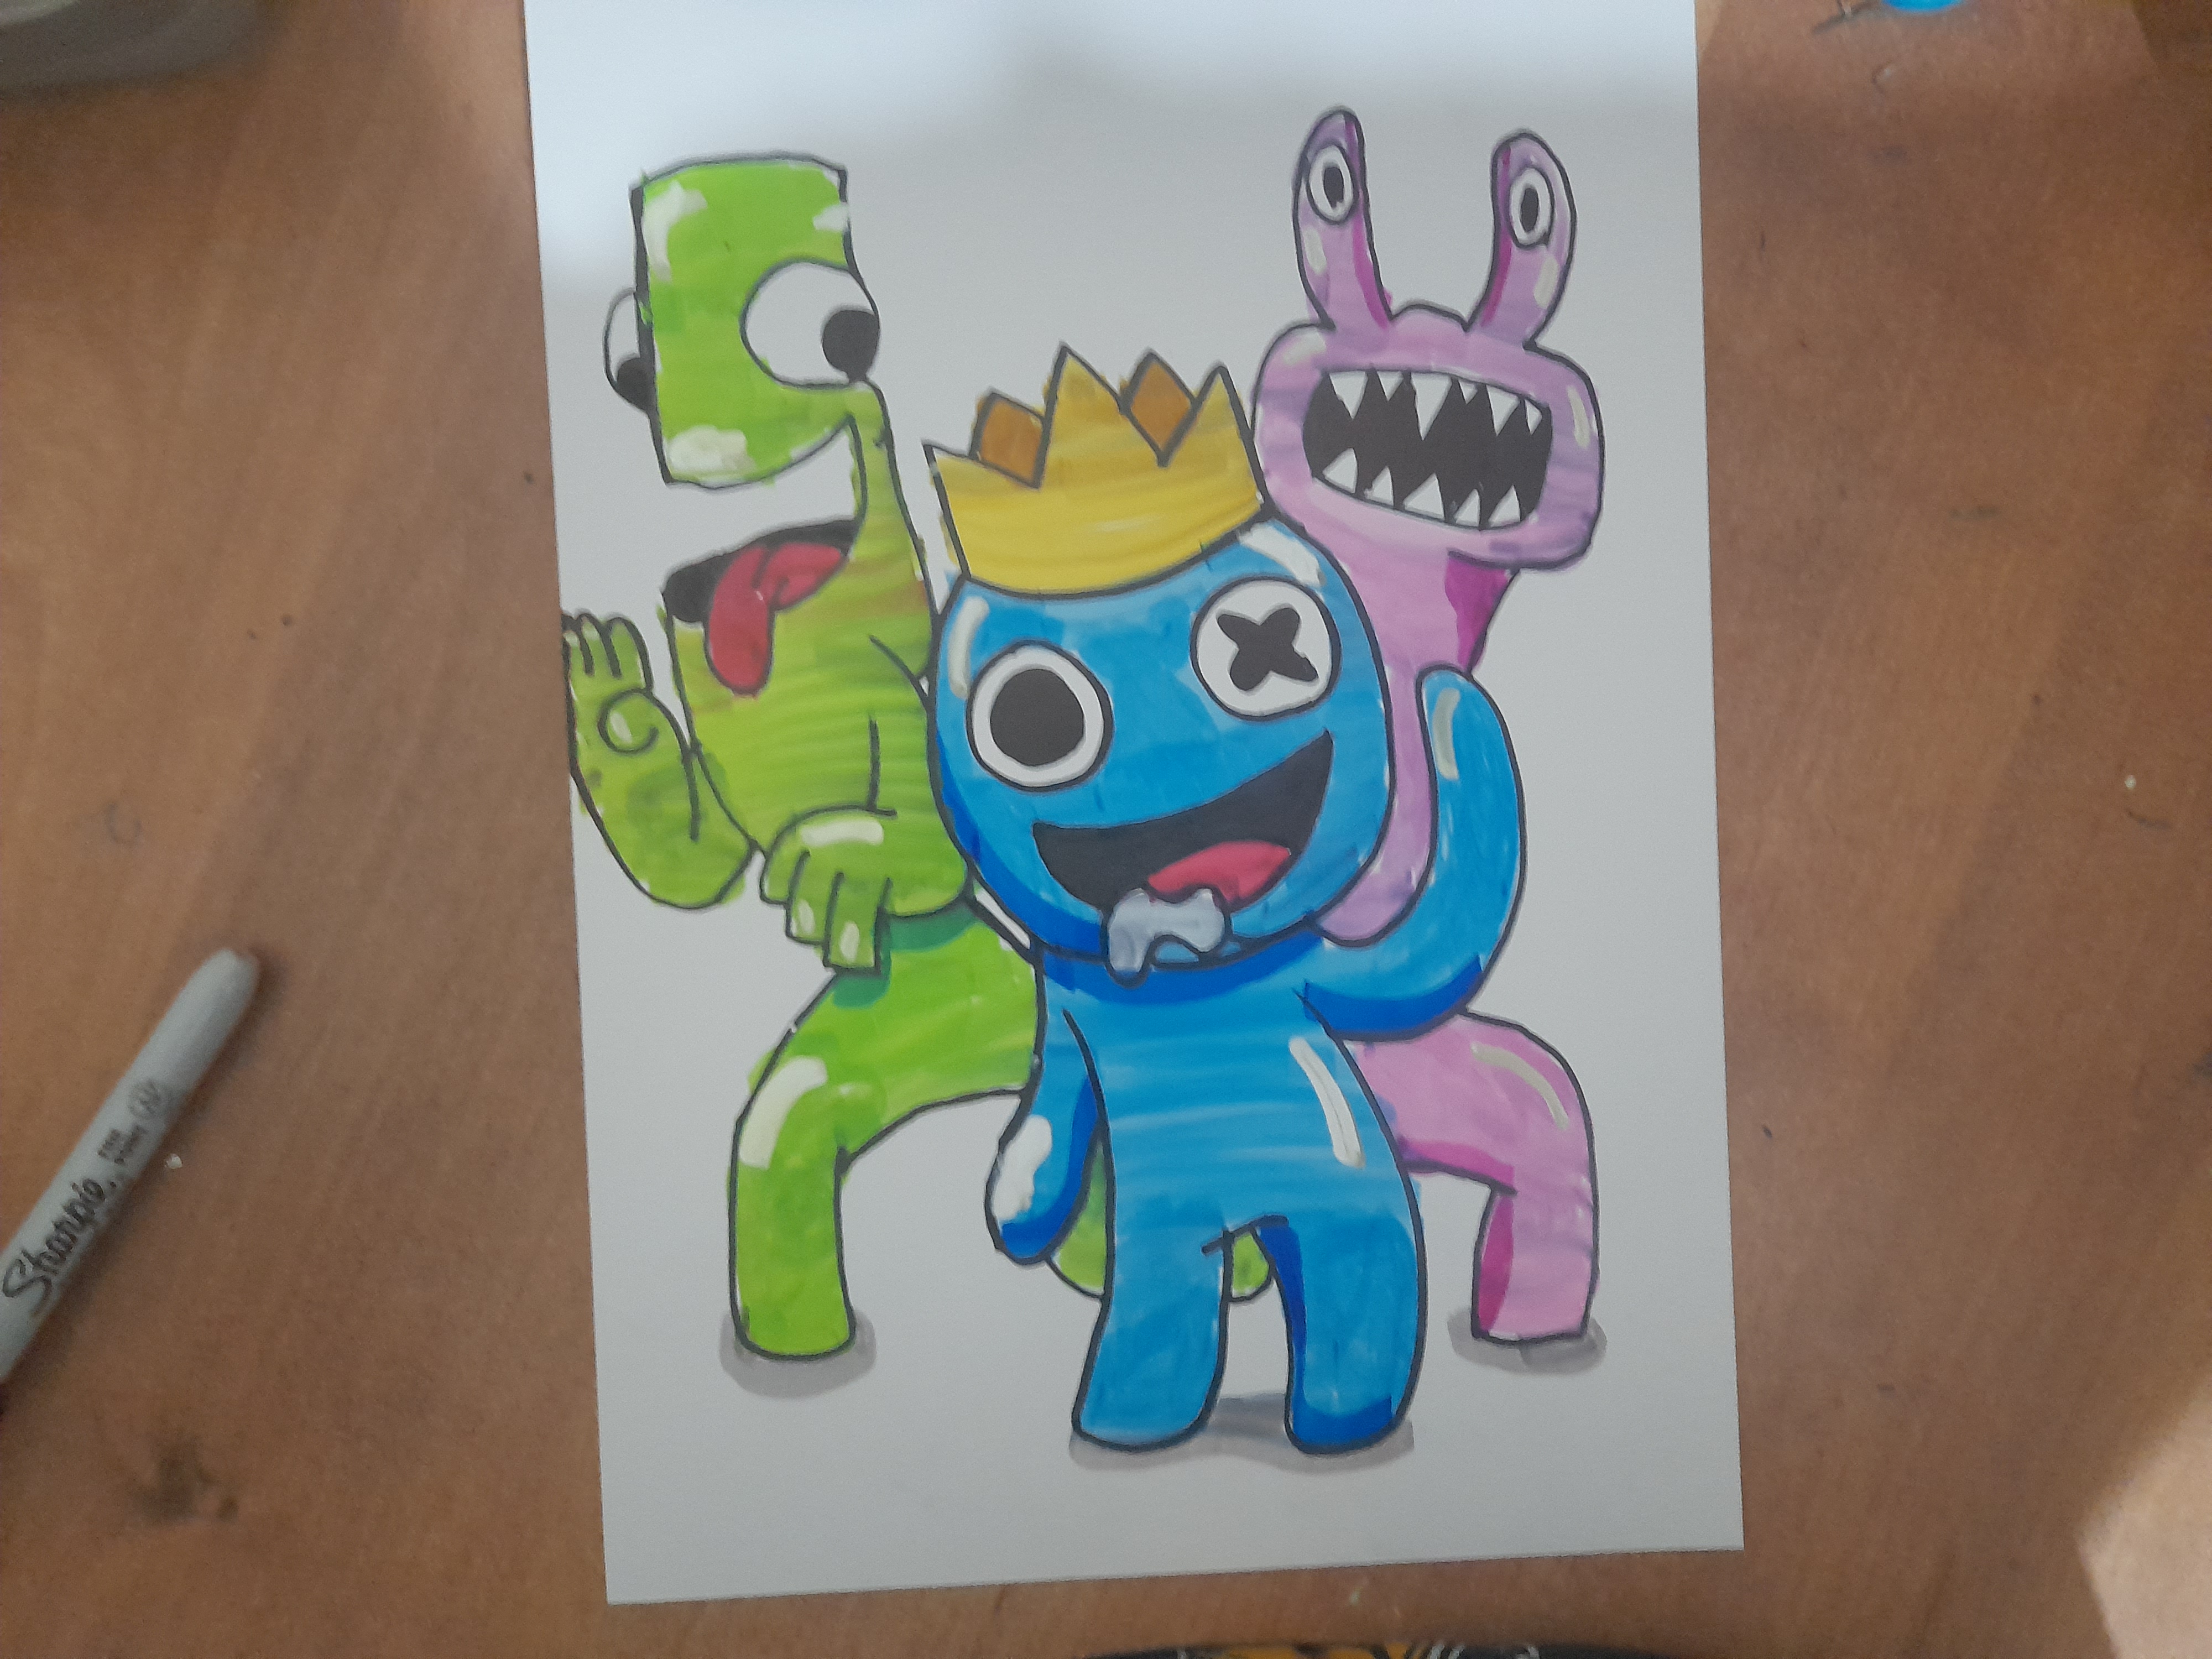 How to Draw Roblox Rainbow Friends Green - ROBLOX DRAWING 